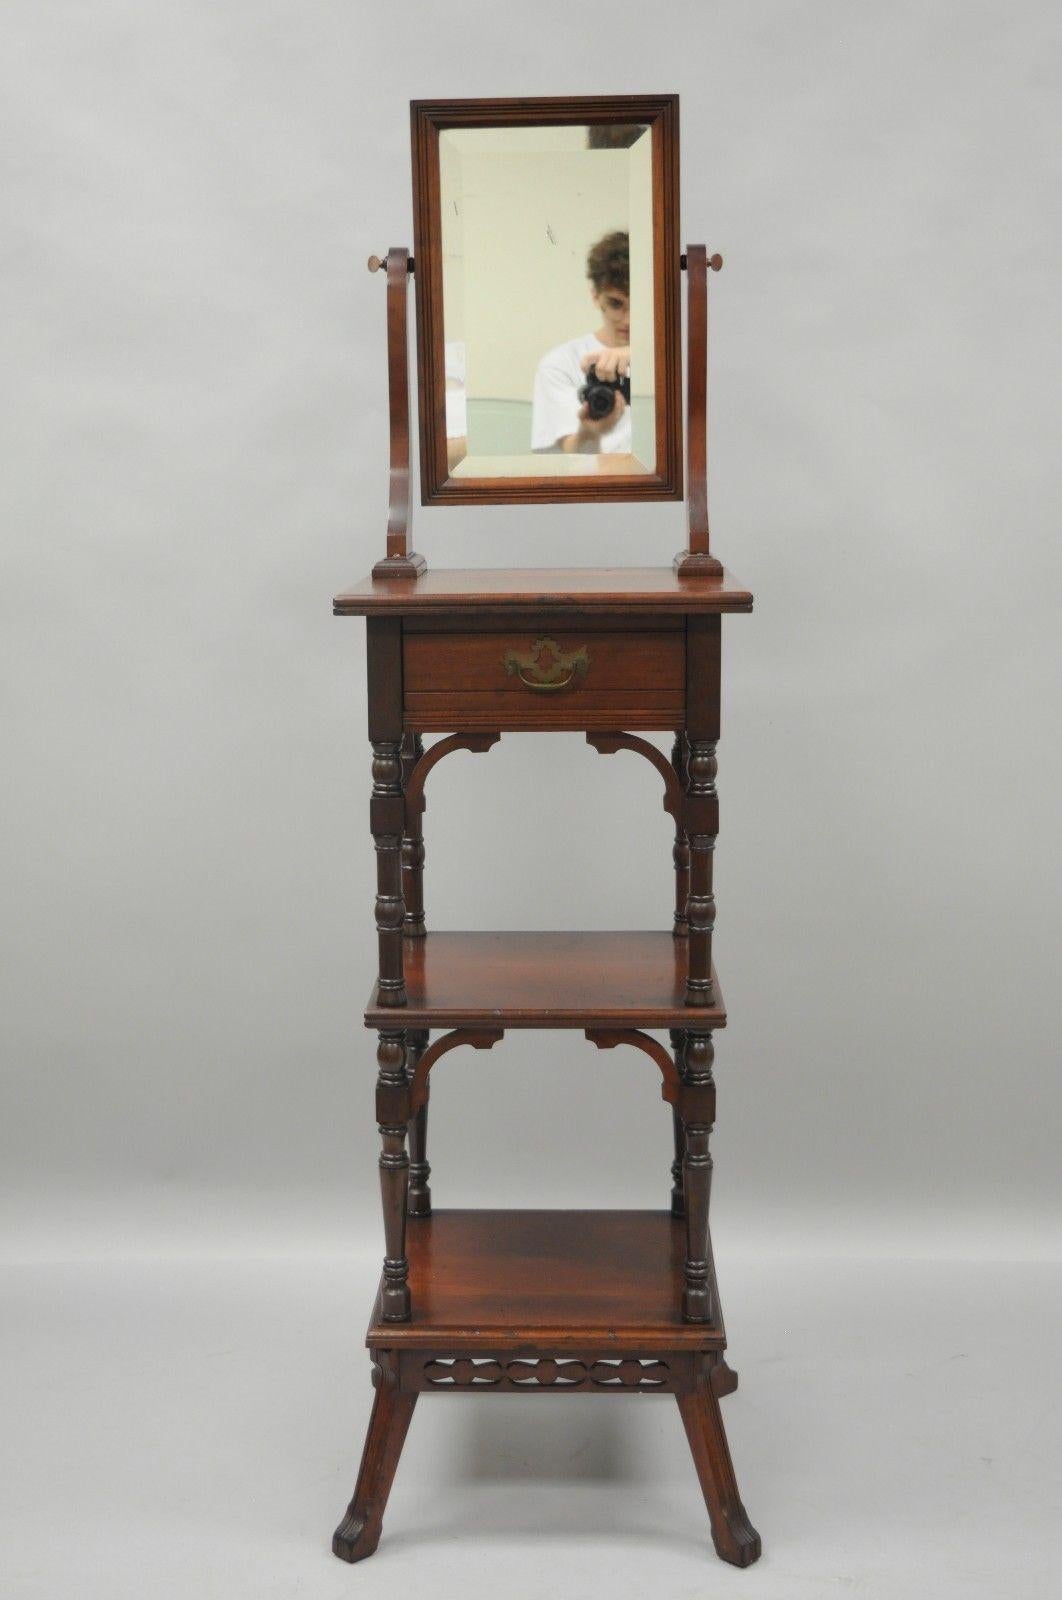 Antique Eastlake Victorian shaving stand and mirror. Item features solid walnut construction, bevelled glass mirror, single knapp joined drawer, two lower shelves, ornate brass handle, quality American craftsmanship, circa mid-late 1800s.